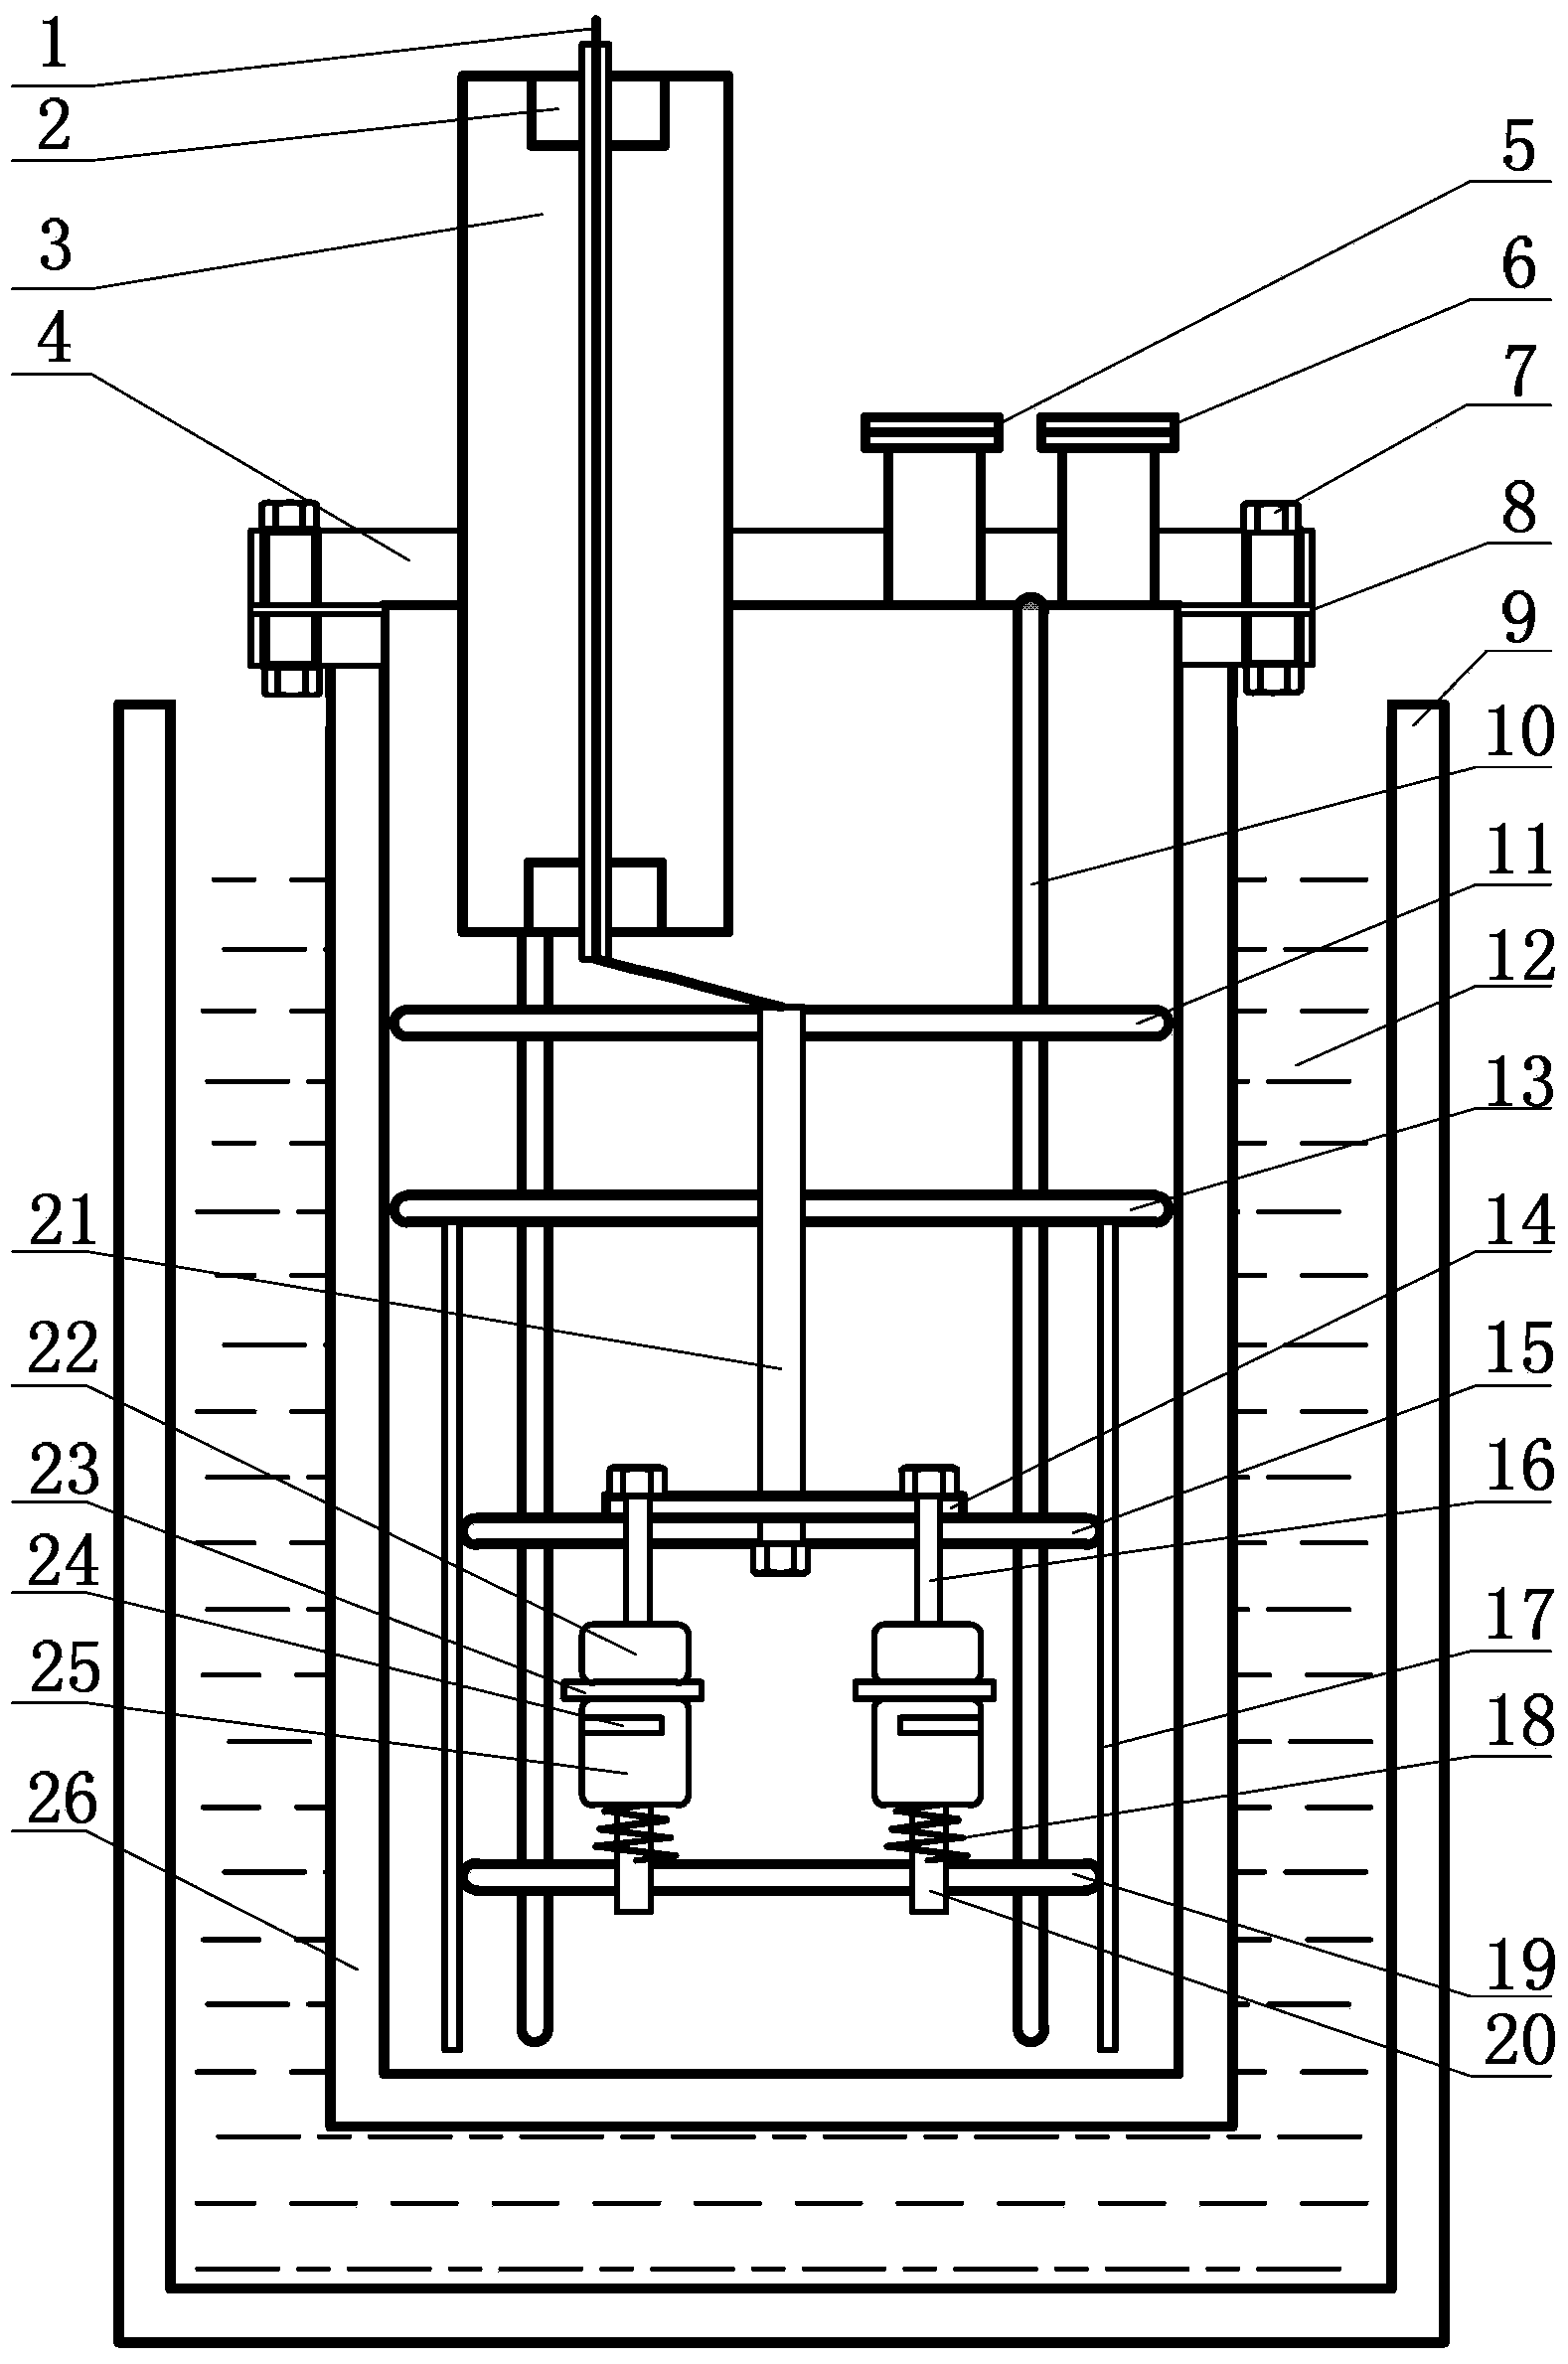 Multi-channel thermal stimulus current measuring device used for dielectric substances